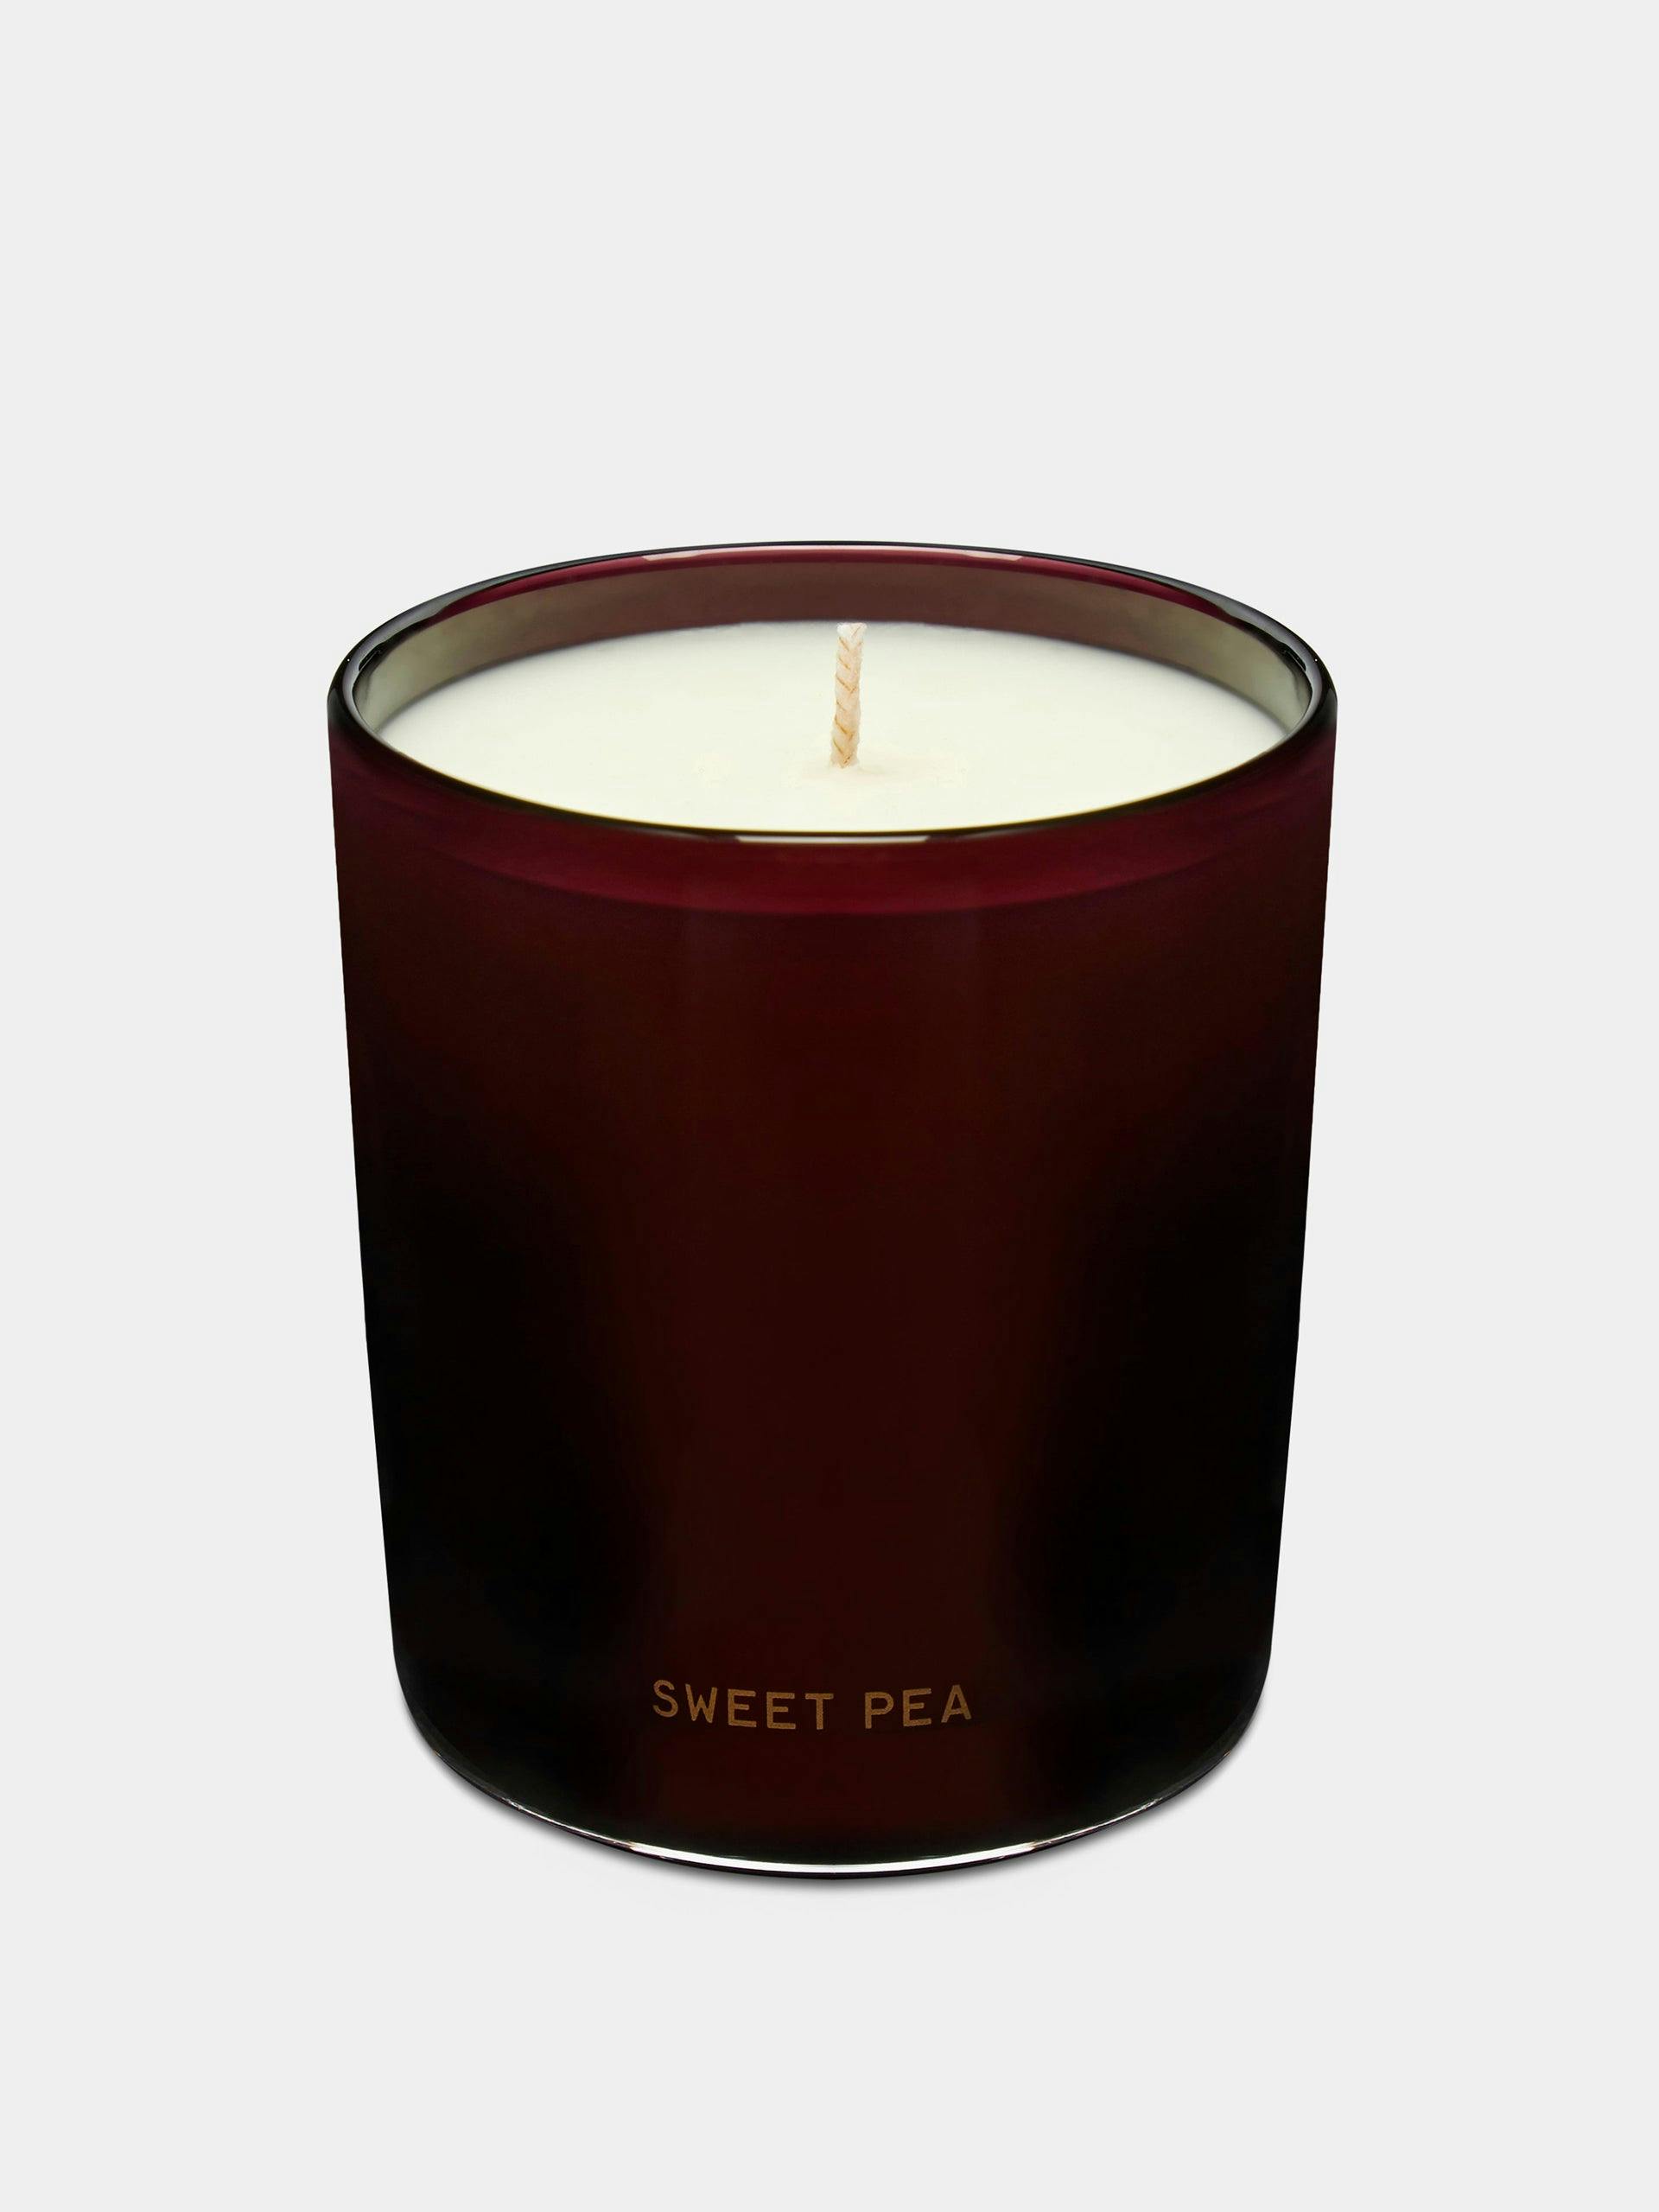 Sweat Pea scented candle